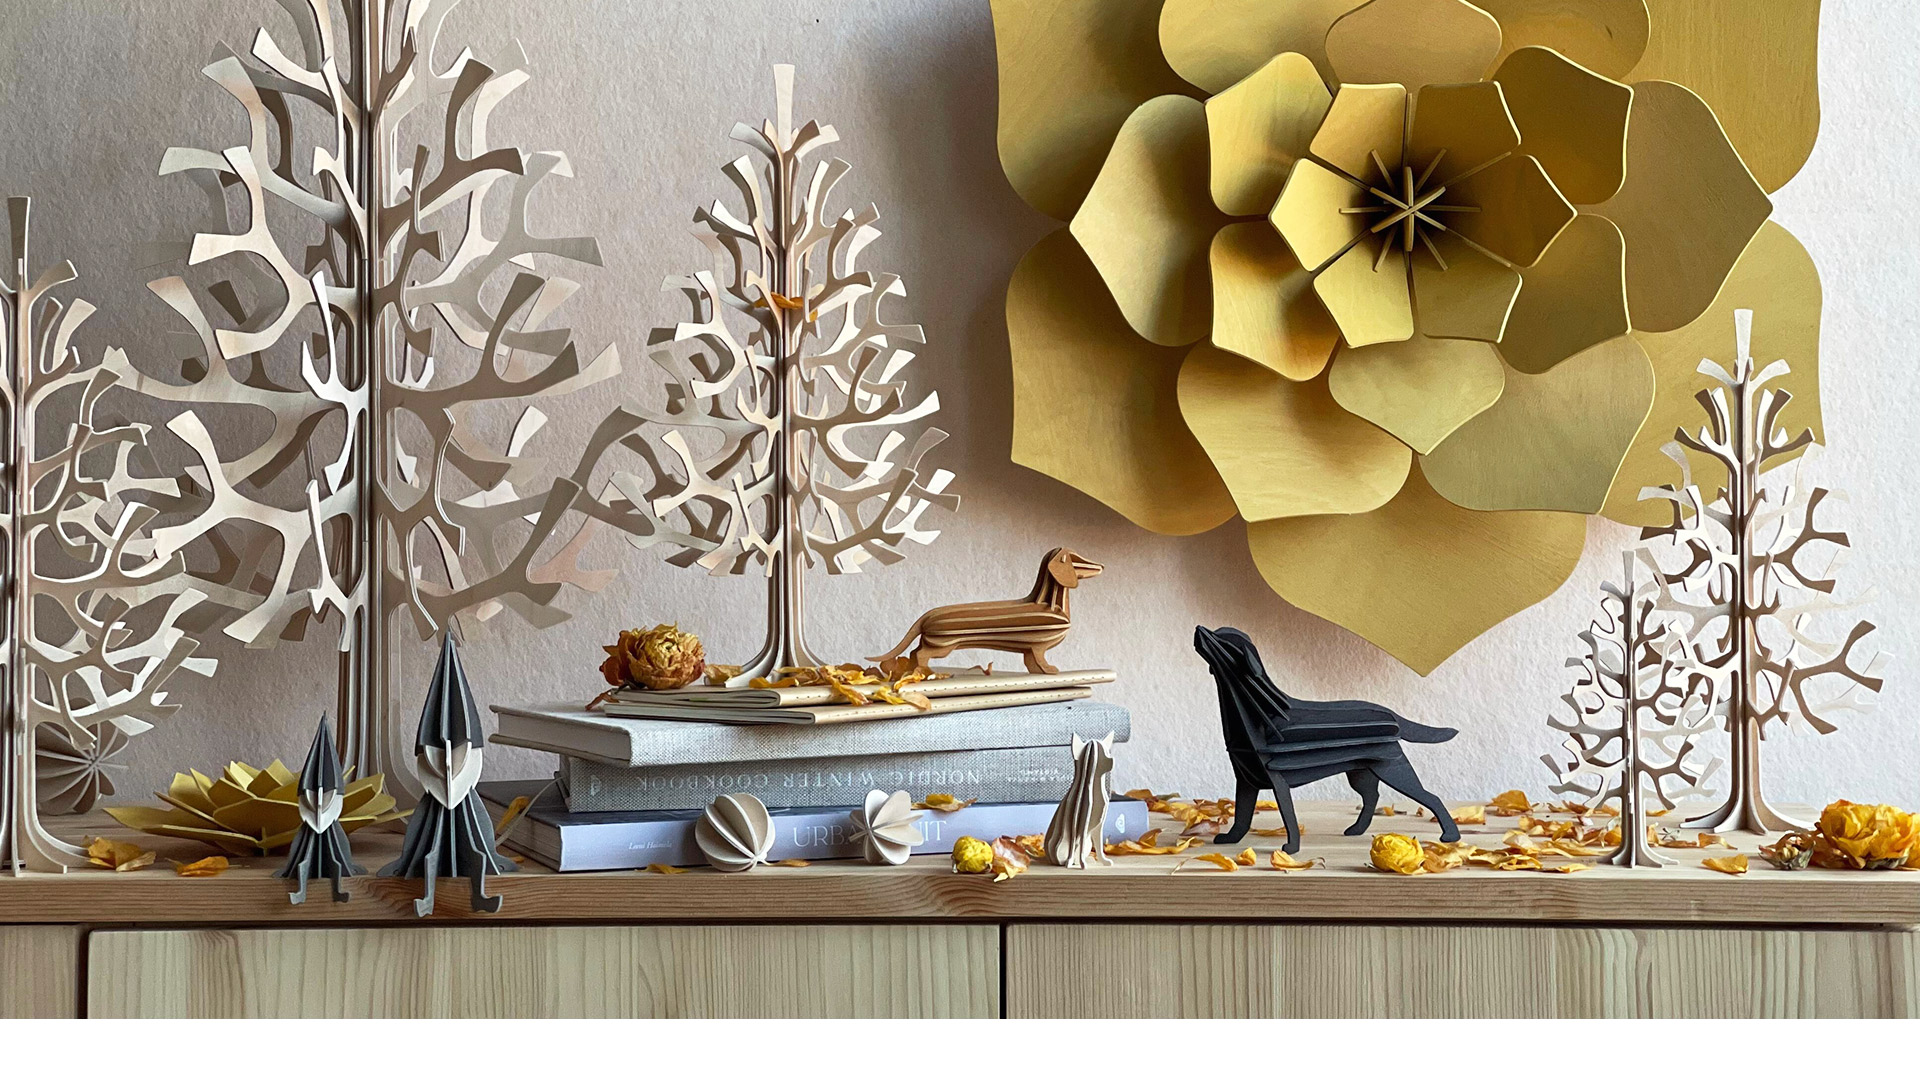 Wooden Lovi products on side table and on the wall, Lovi Spruces, Decor Flower, Elves and Dog figures